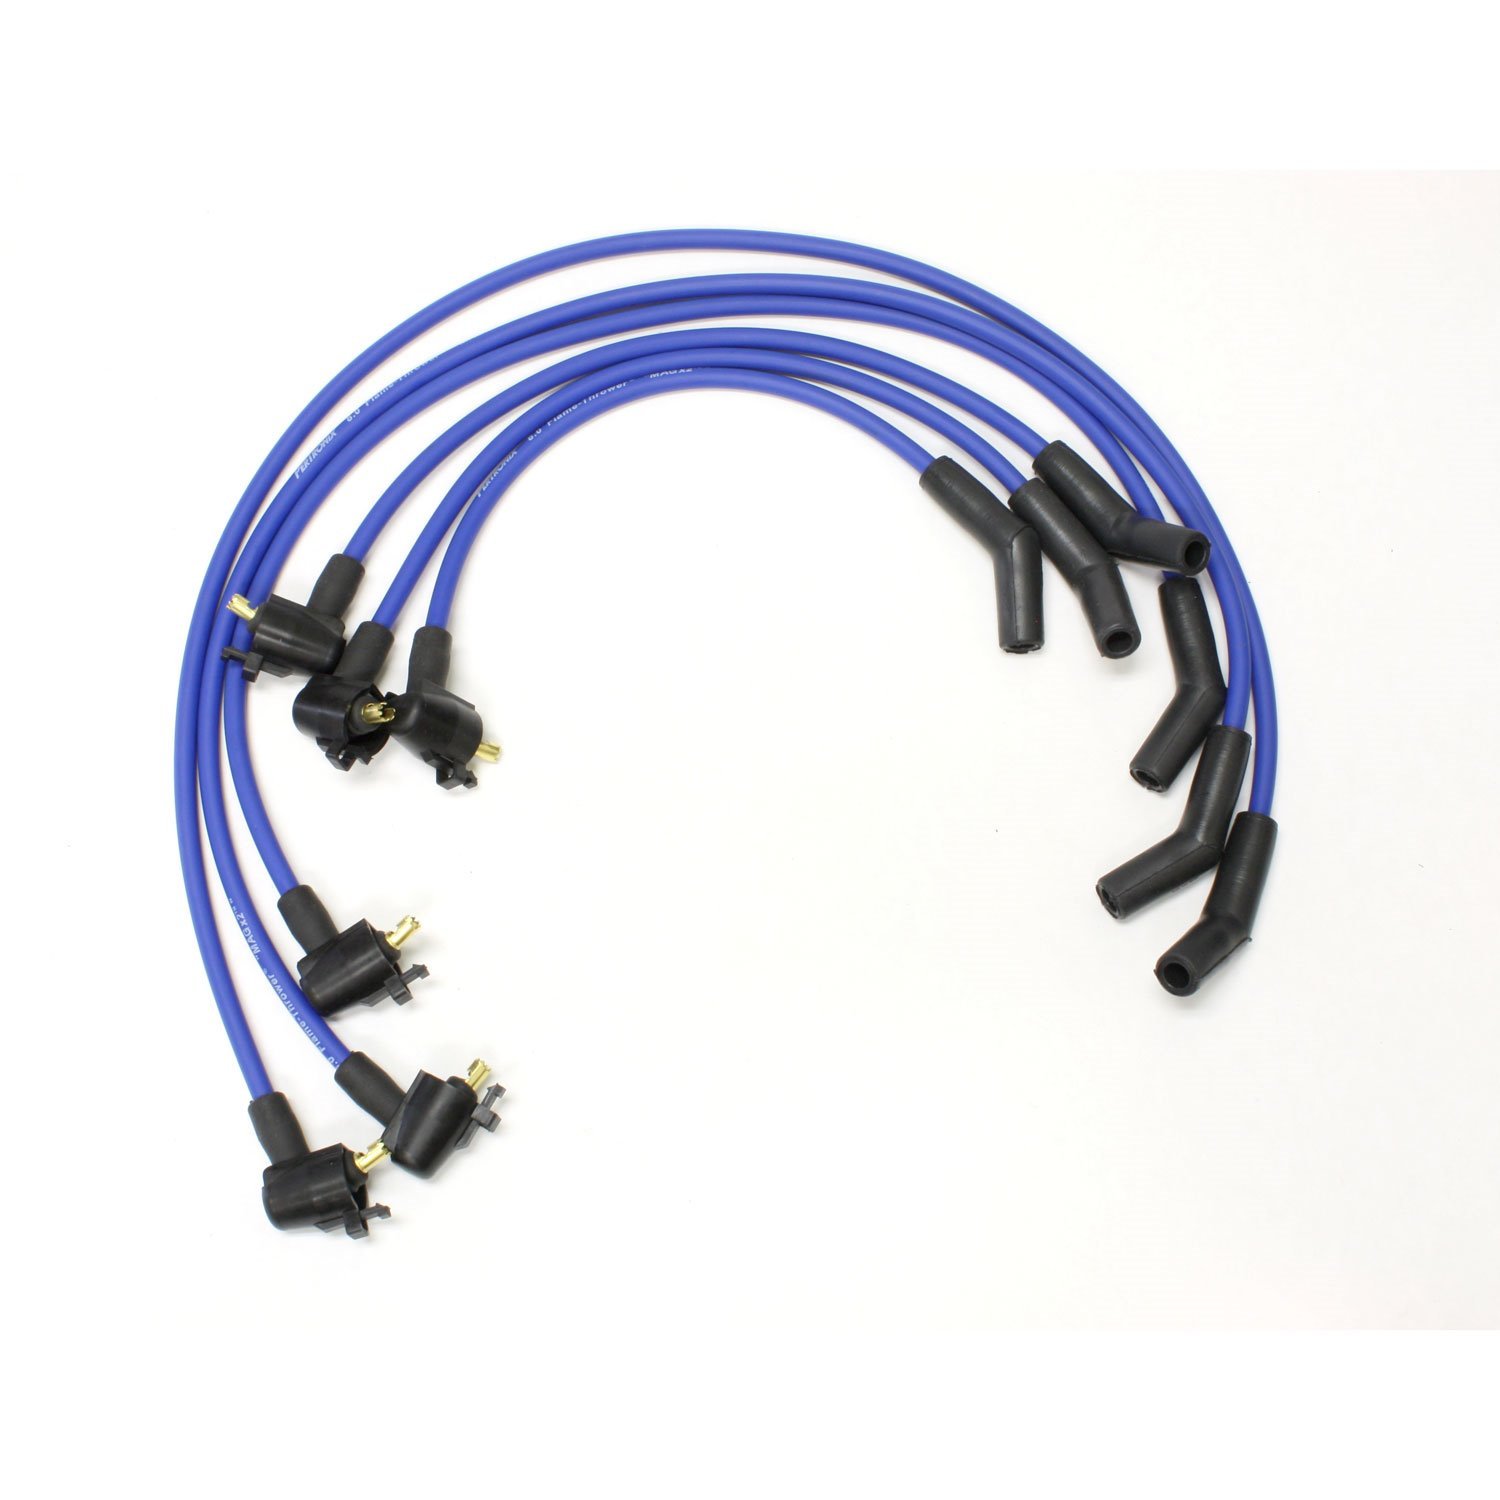 PerTronix 806324 Flame-Thrower Spark Plug Wires 6 cyl